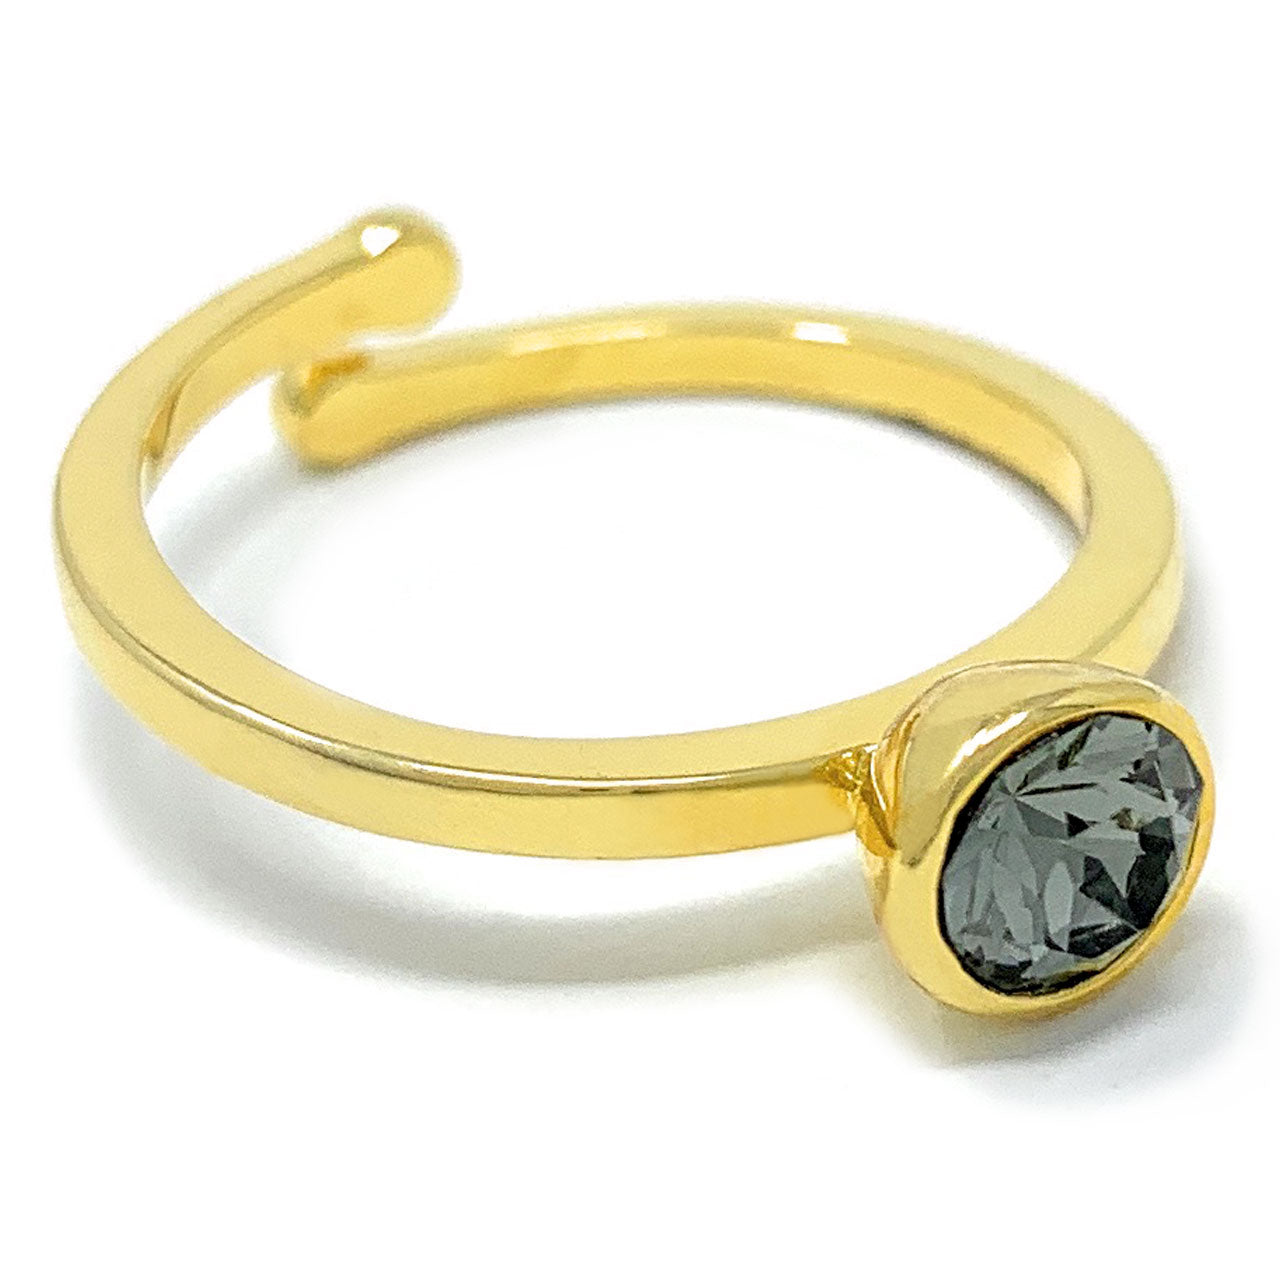 Harley Adjustable Ring with Black Diamond Round Crystals from Swarovski Gold Plated - Ed Heart